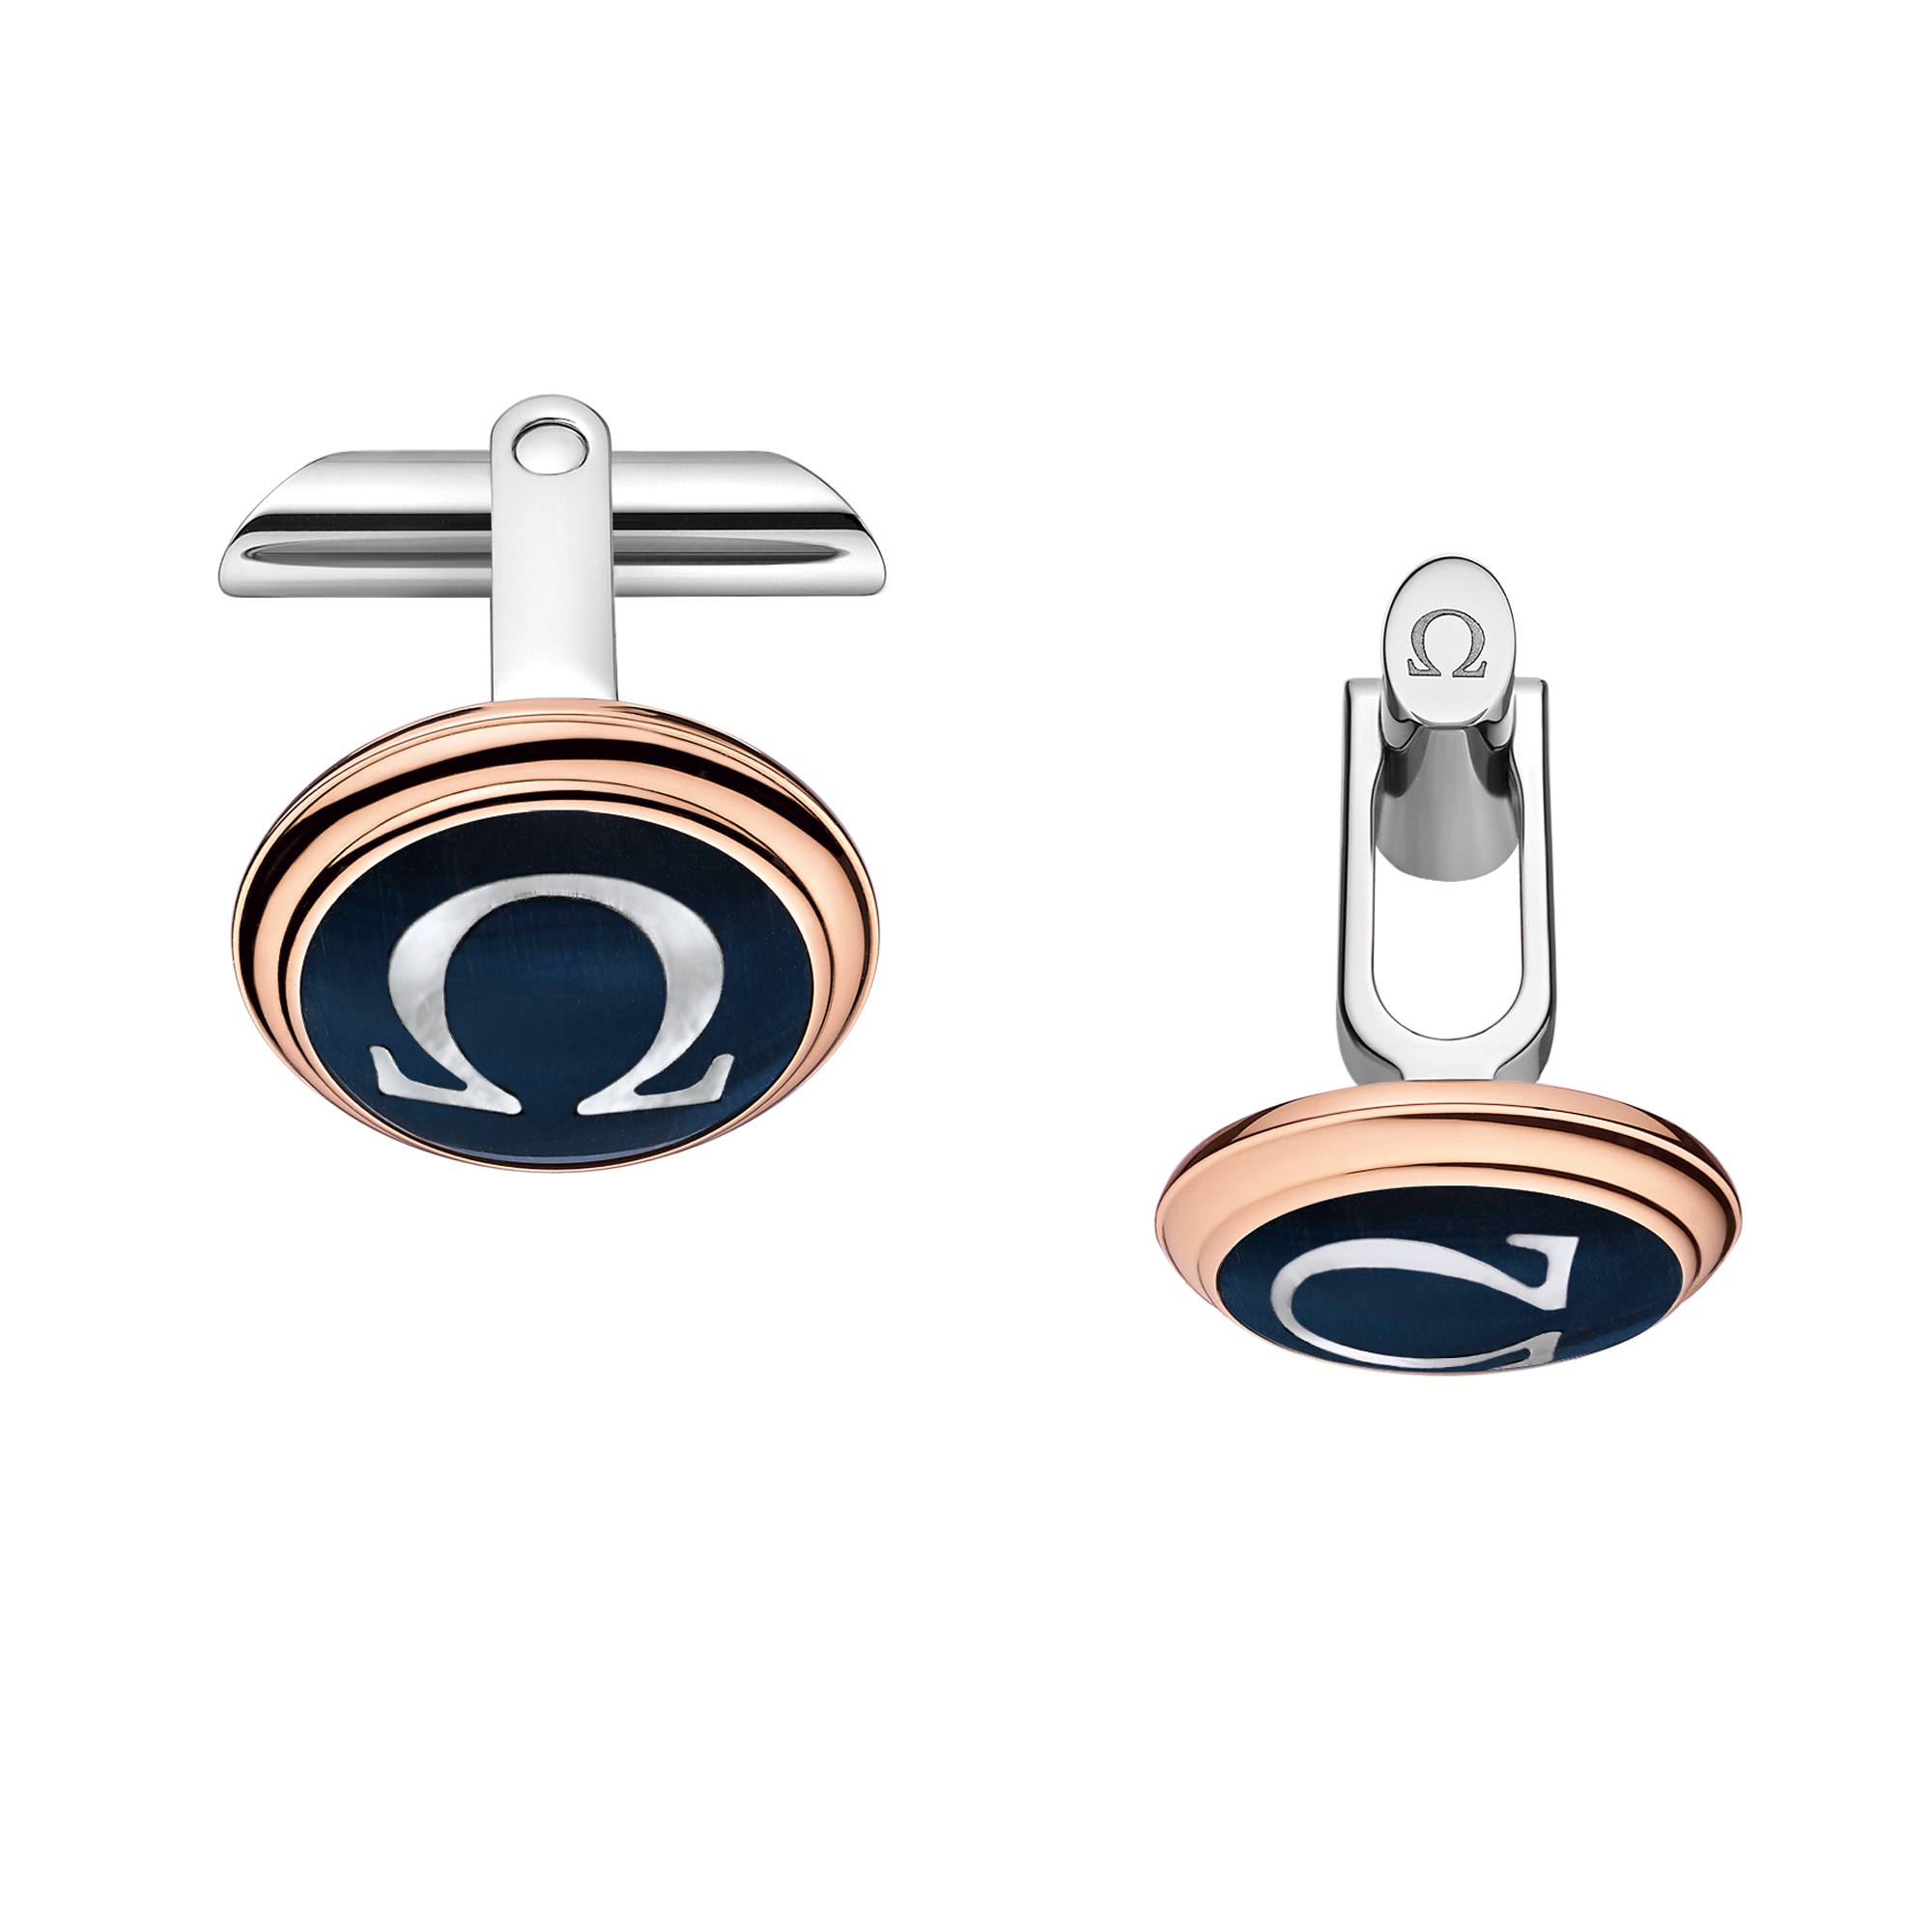 Omegamania Cufflinks, 18K red gold, Mother-of-pearl, Stainless steel - CA02DG0700305